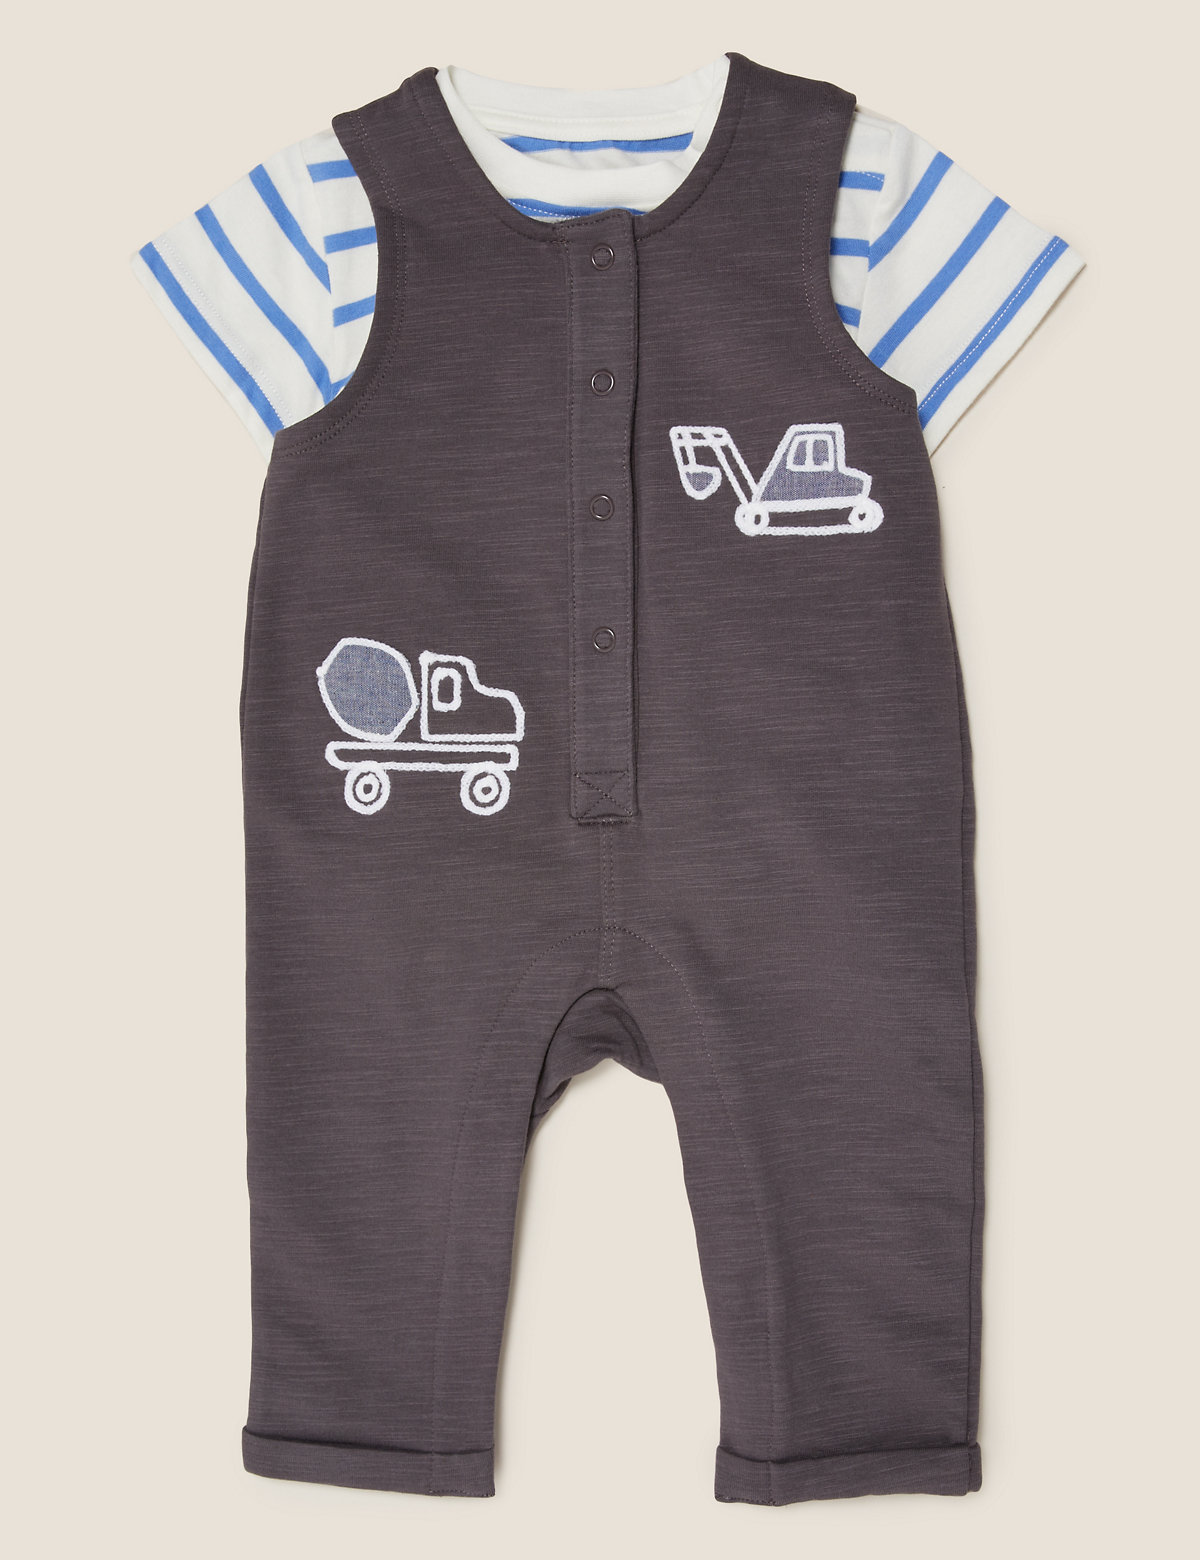 2pc Cotton Transport Dungaree Outfit